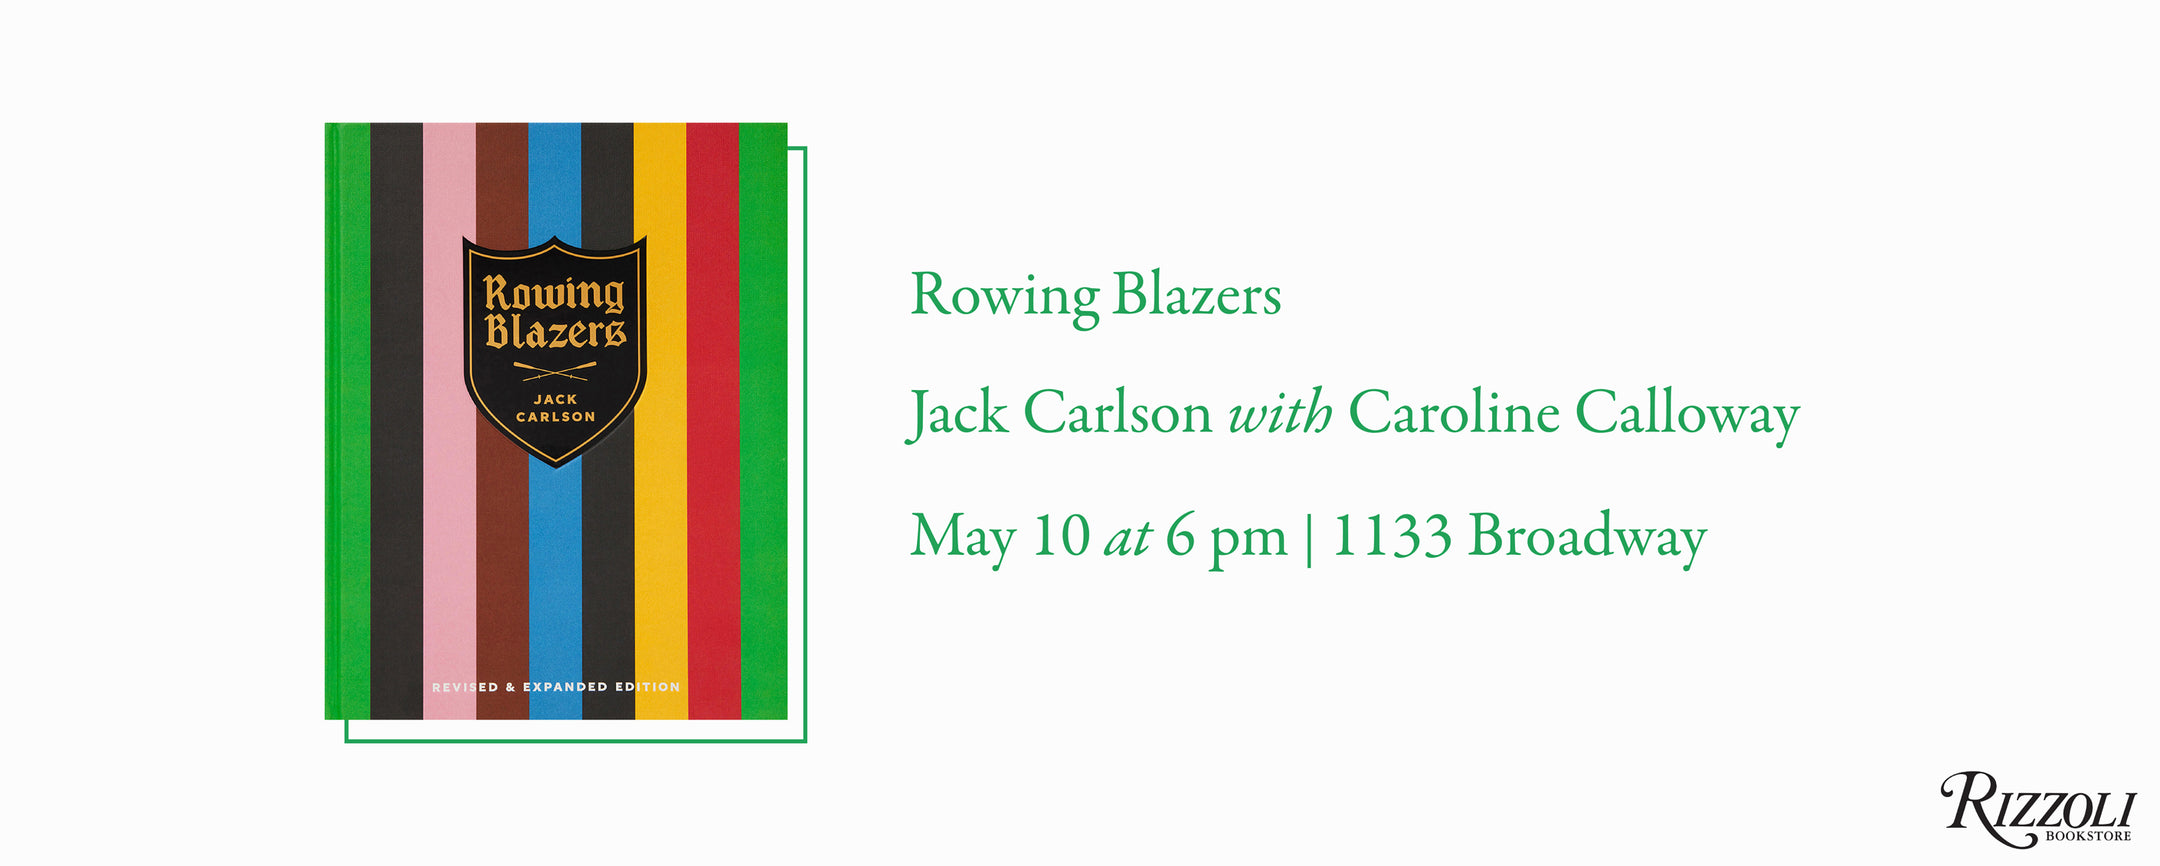 YOU’RE INVITED: ROWING BLAZERS AT THE RIZZOLI BOOKSTORE